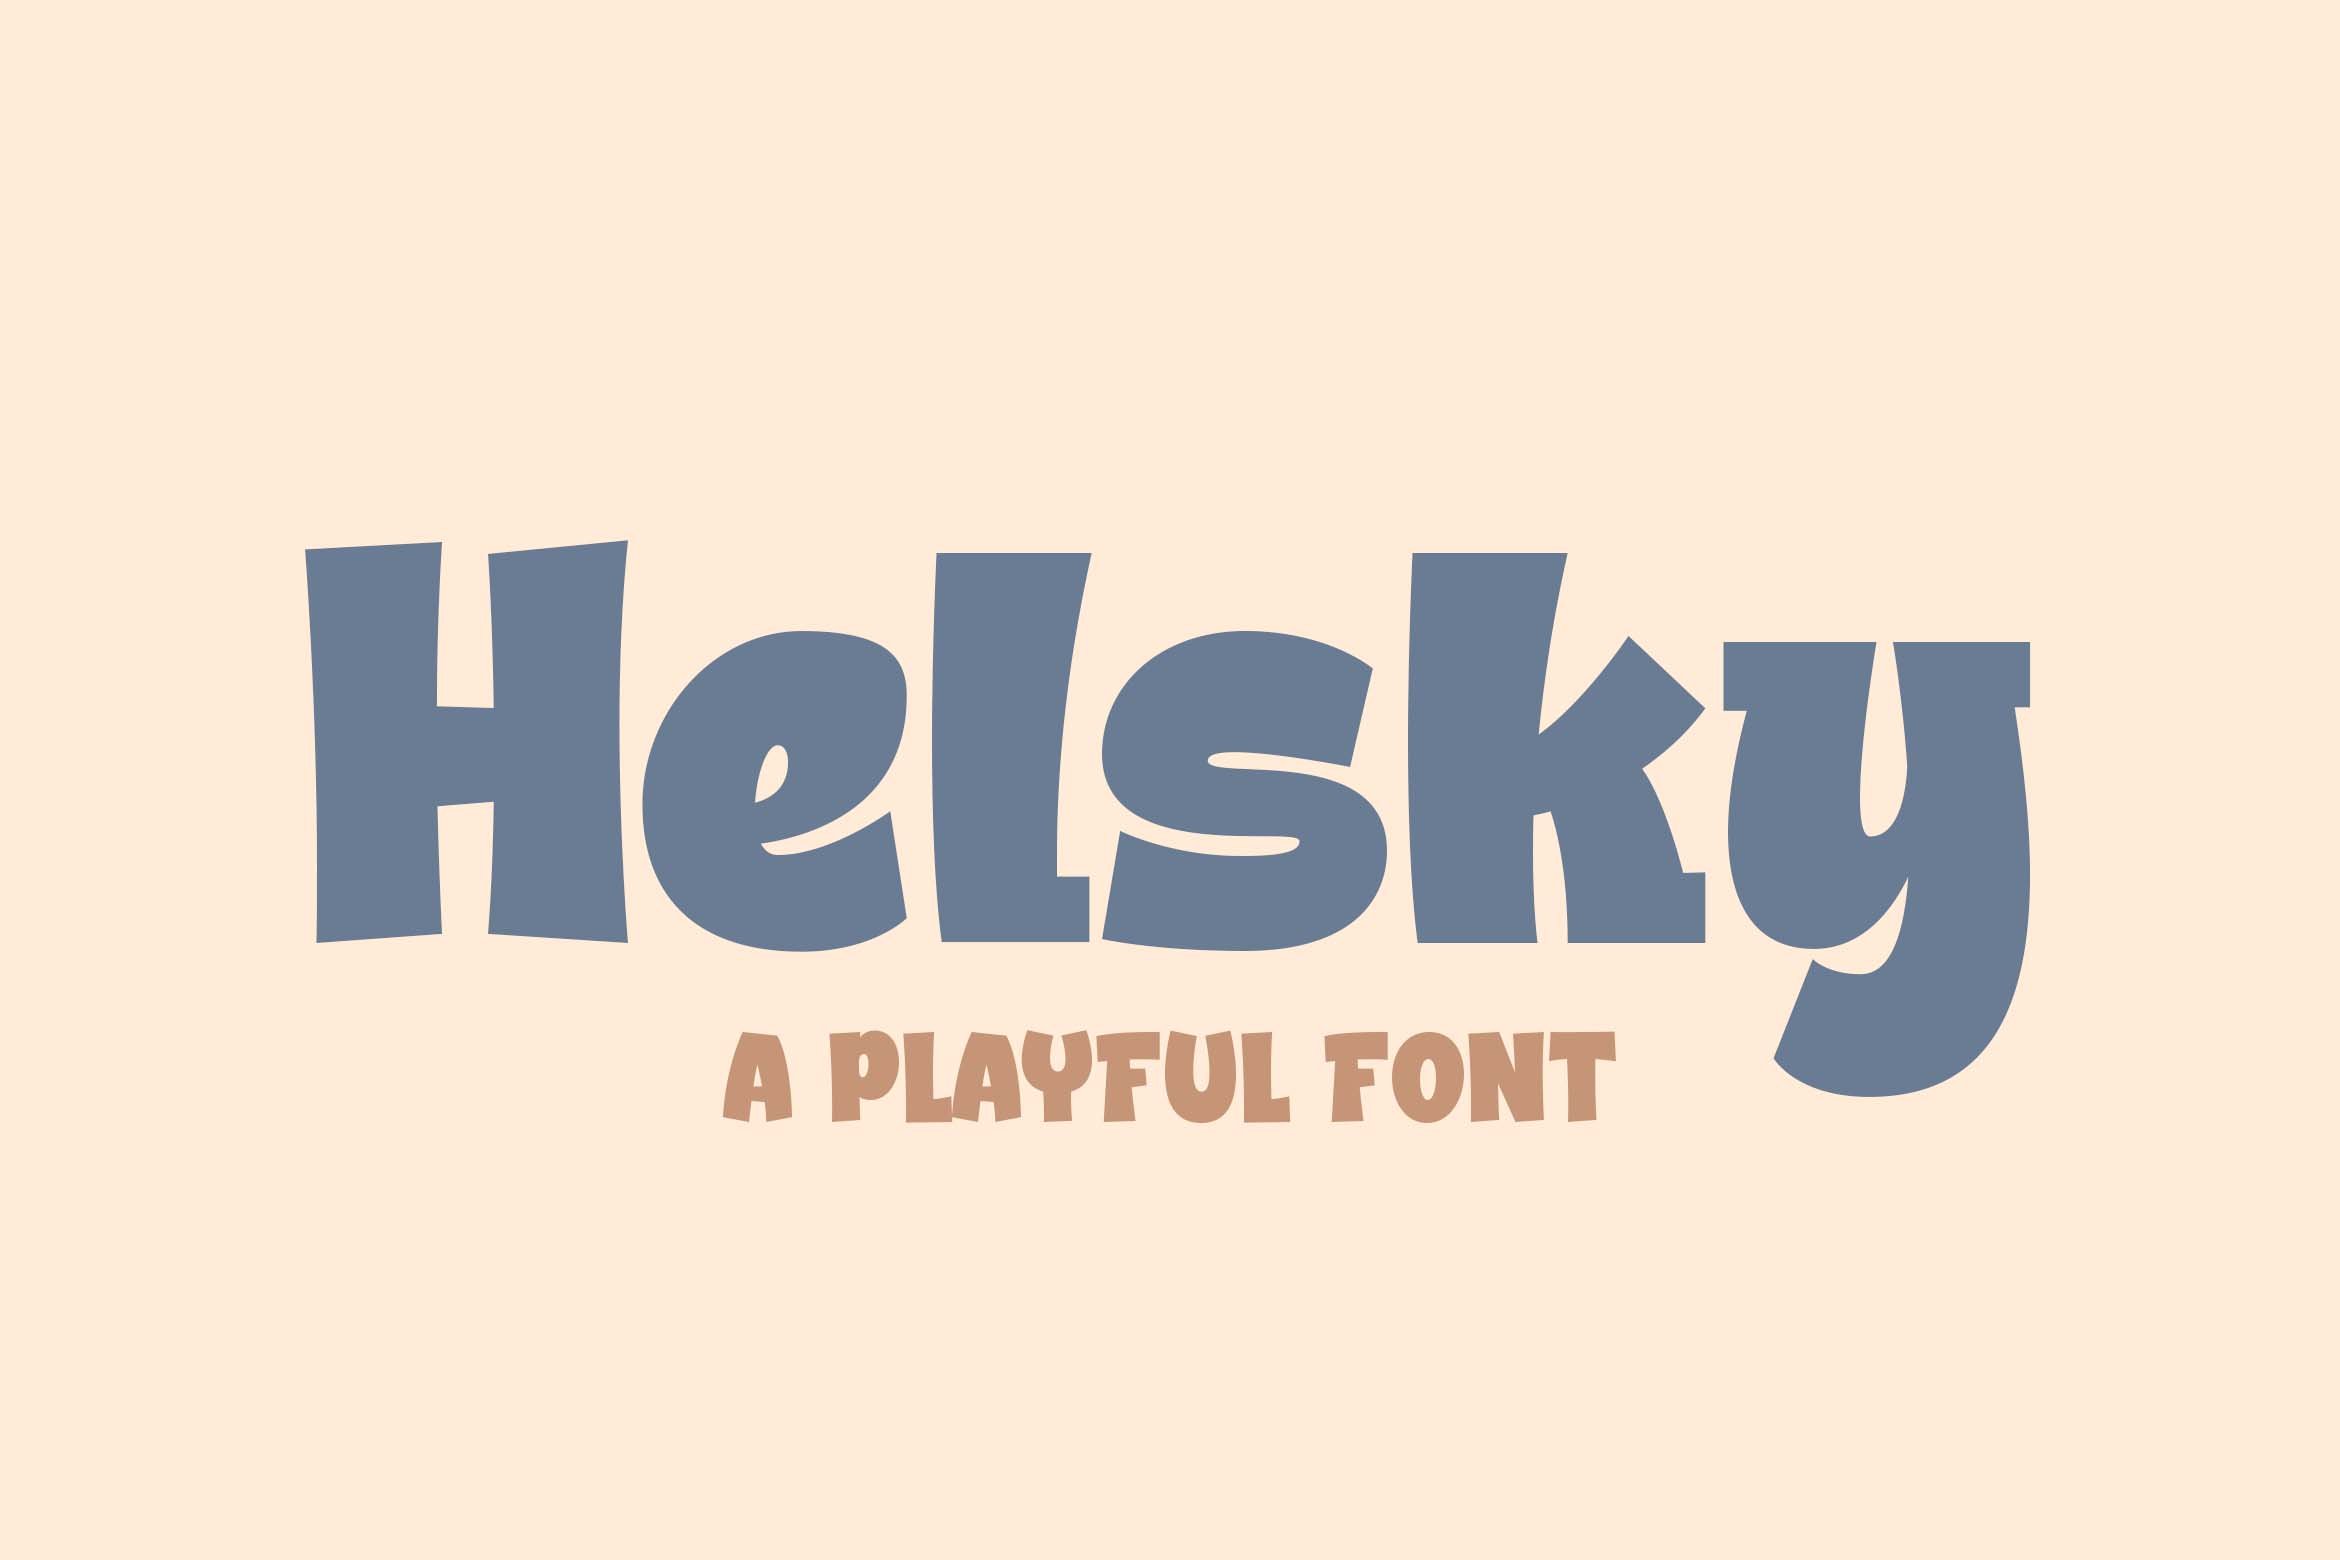 Helsky a Playful Font cover image.